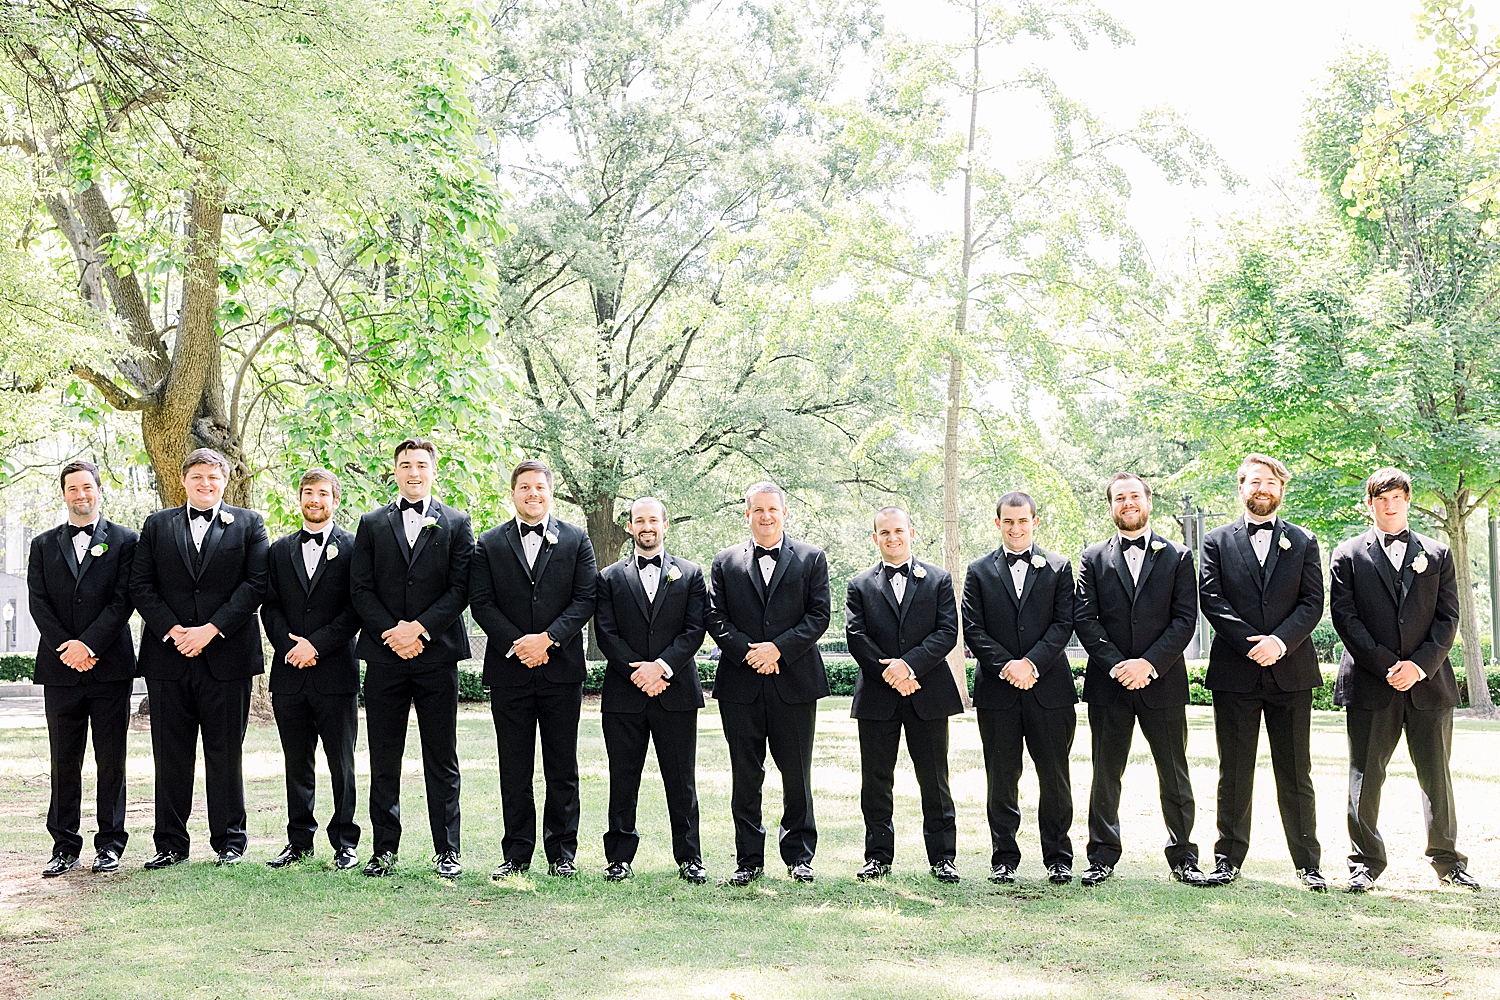 groom poses with groomsmen in classic black tuxes